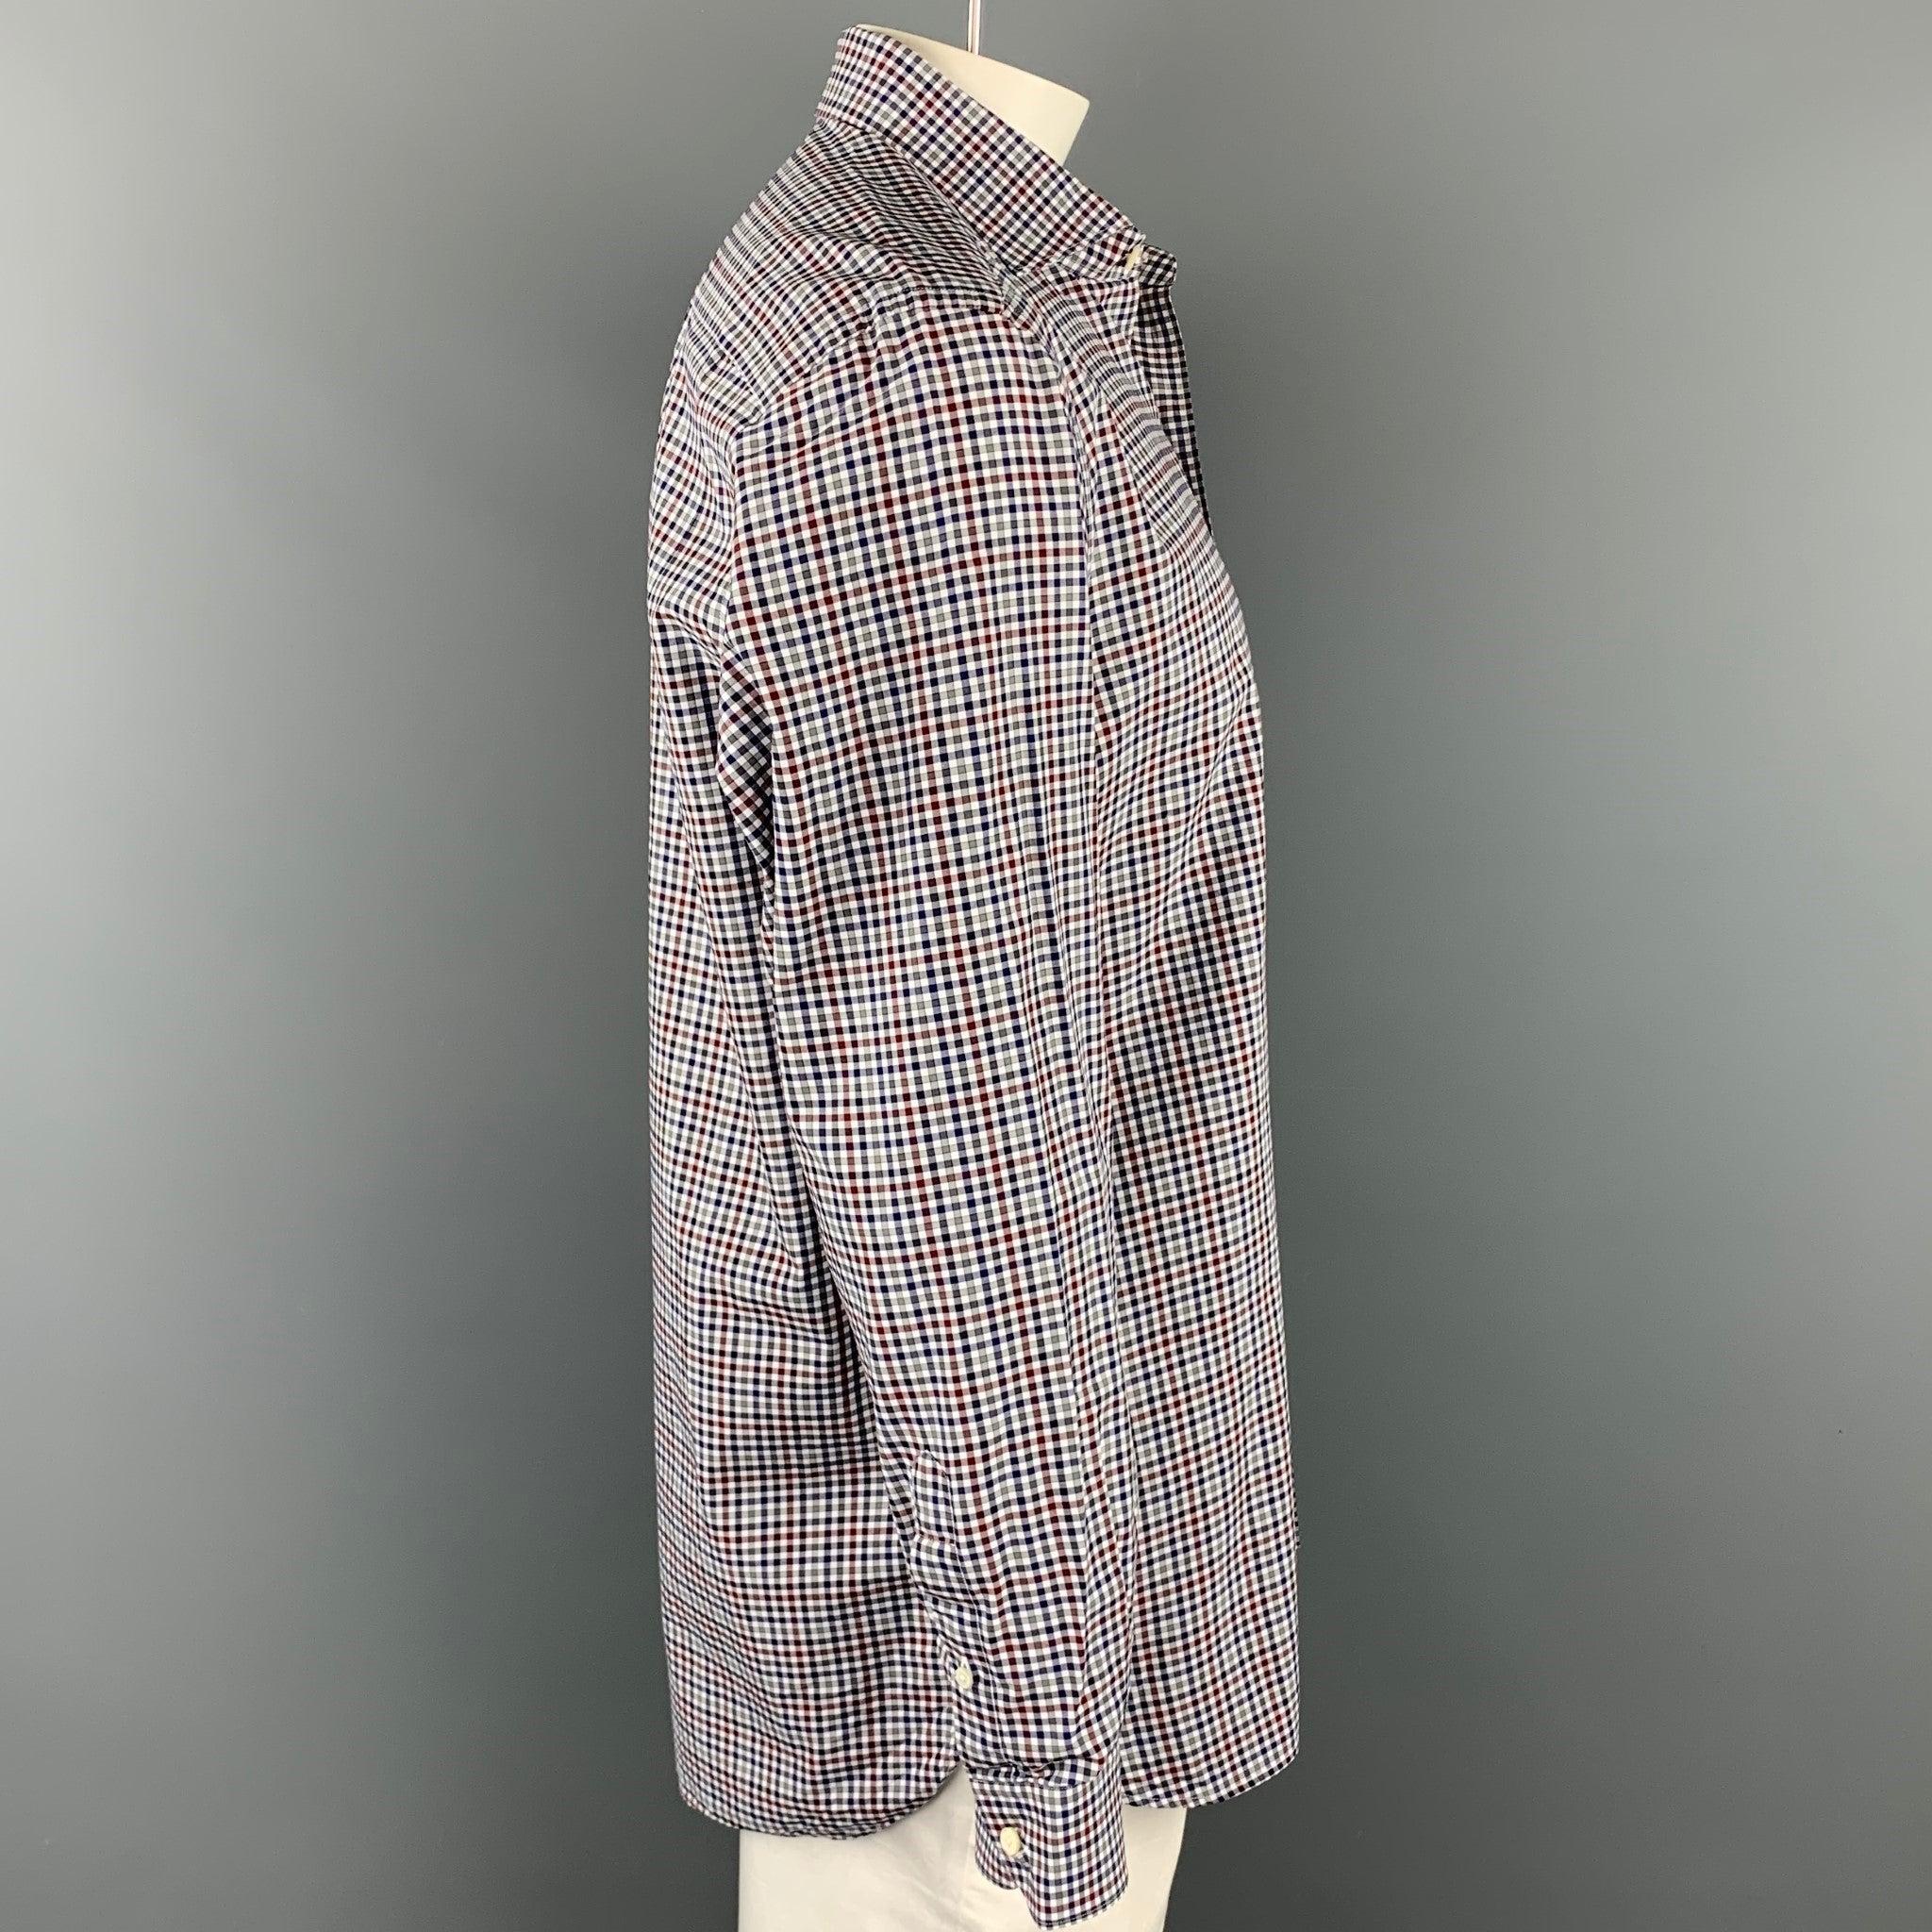 ERMENEGILDO ZEGNA long sleeve shirt comes in a black & blue gingham cotton featuring a button up style and a spread collar.Very Good
Pre-Owned Condition. 

Marked:   XL 

Measurements: 
 
Shoulder: 19.5 inches  Chest: 48 inches  Sleeve: 26.5 inches 